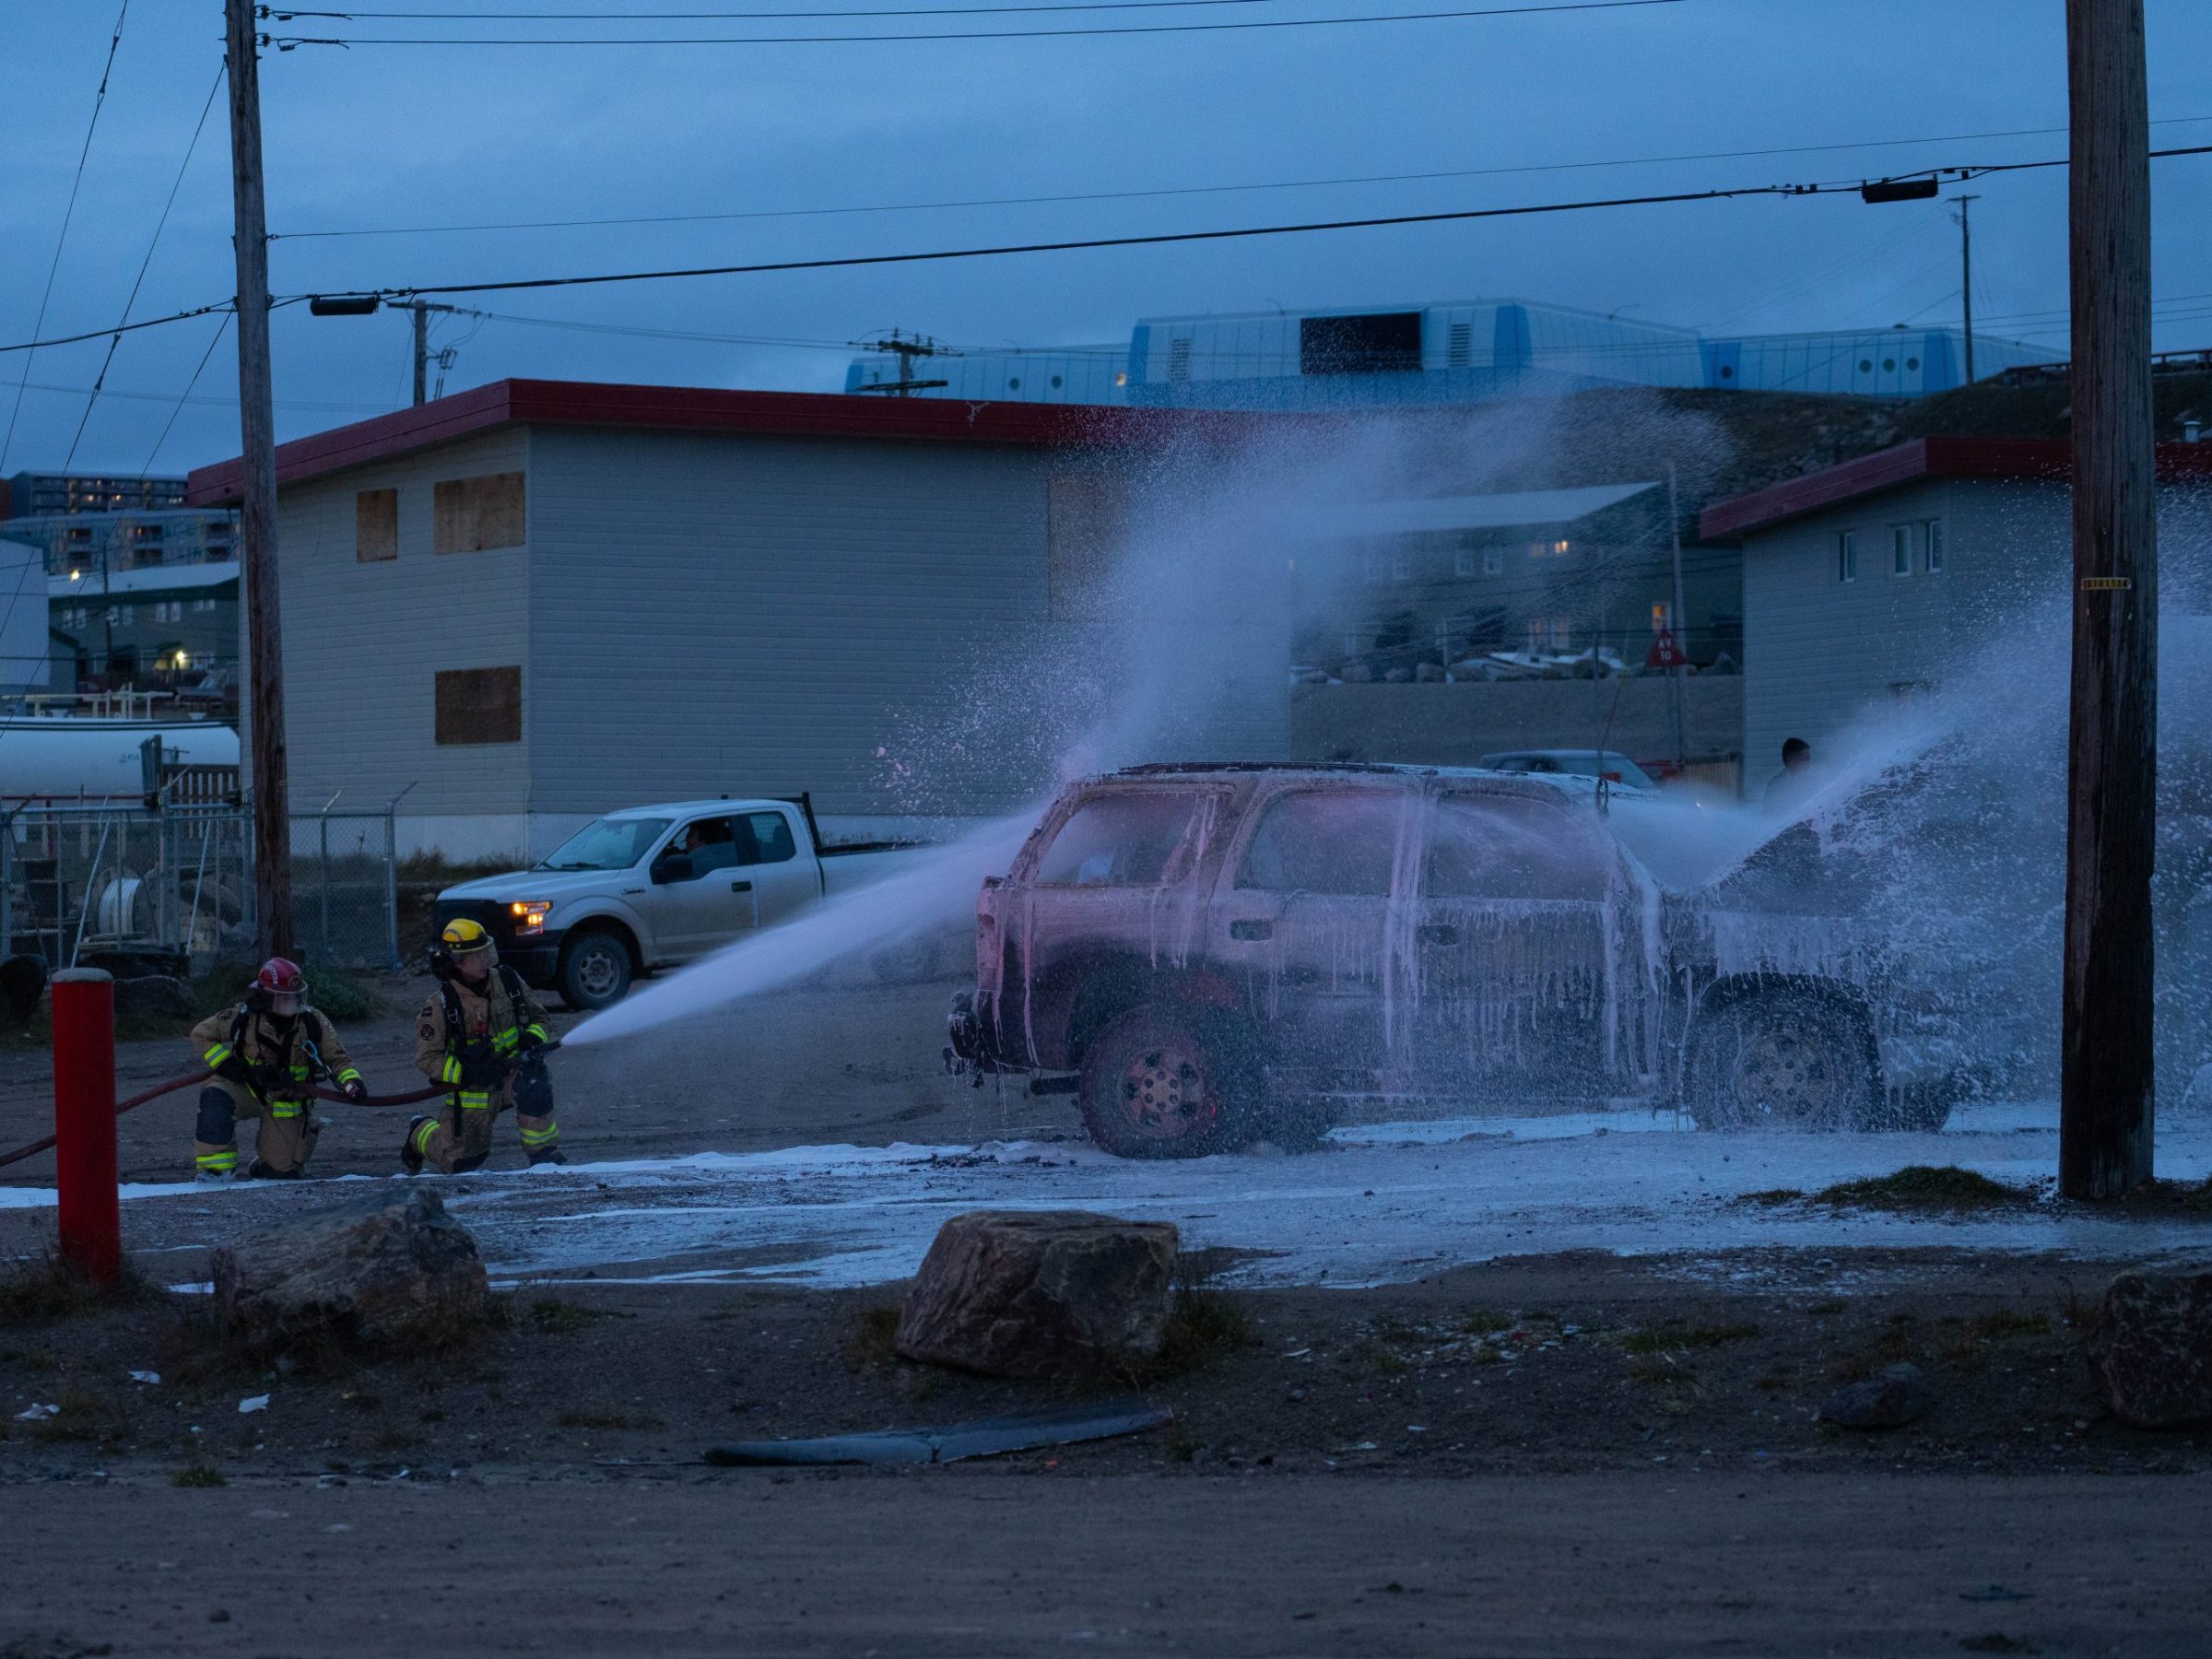 Firefighters hose down an SUV that caught fire near the Northwestel building in Iqaluit on Wednesday evening. According to city spokesperson Kent Driscoll, the fire was reported around 7:30 p.m. and firefighters declared it to be under control by 8:27 p.m. No one was injured and the RCMP is investigating the fire, he said. (Photo by Jason Sudlovenick)